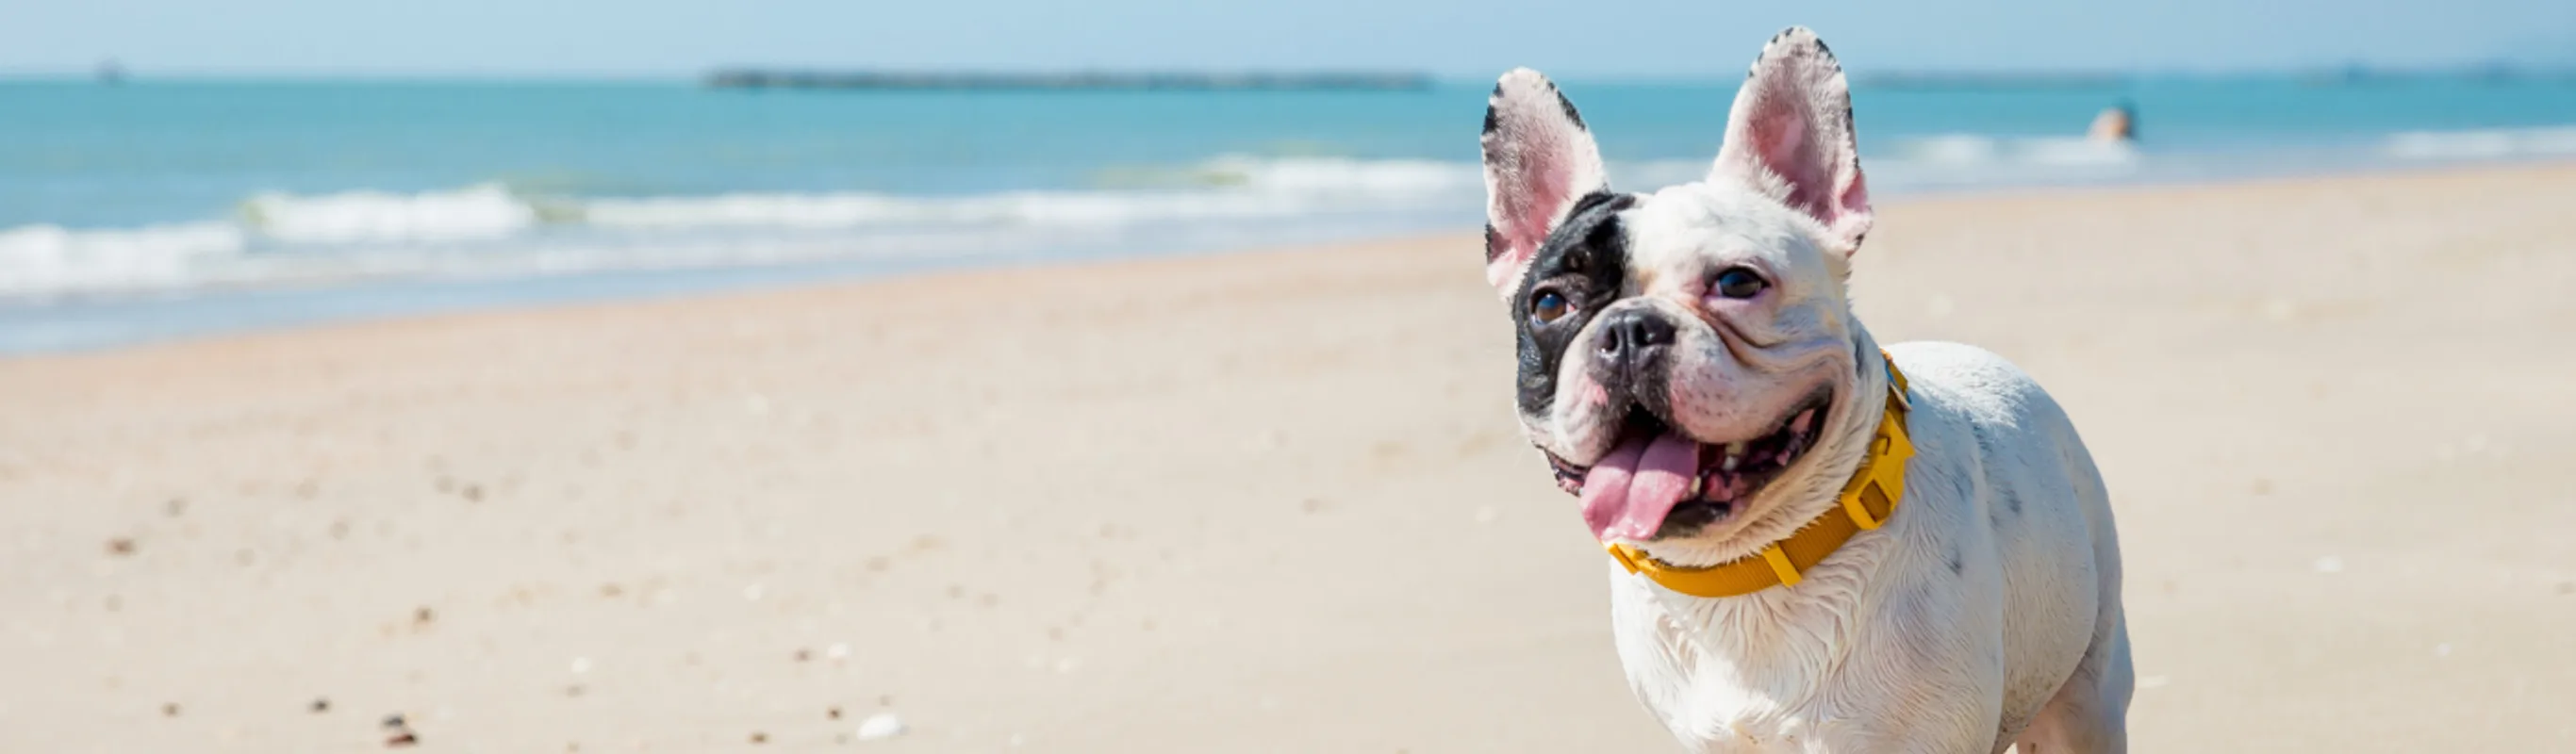 French bulldog standing on a flat, sandy beach with the ocean behind it